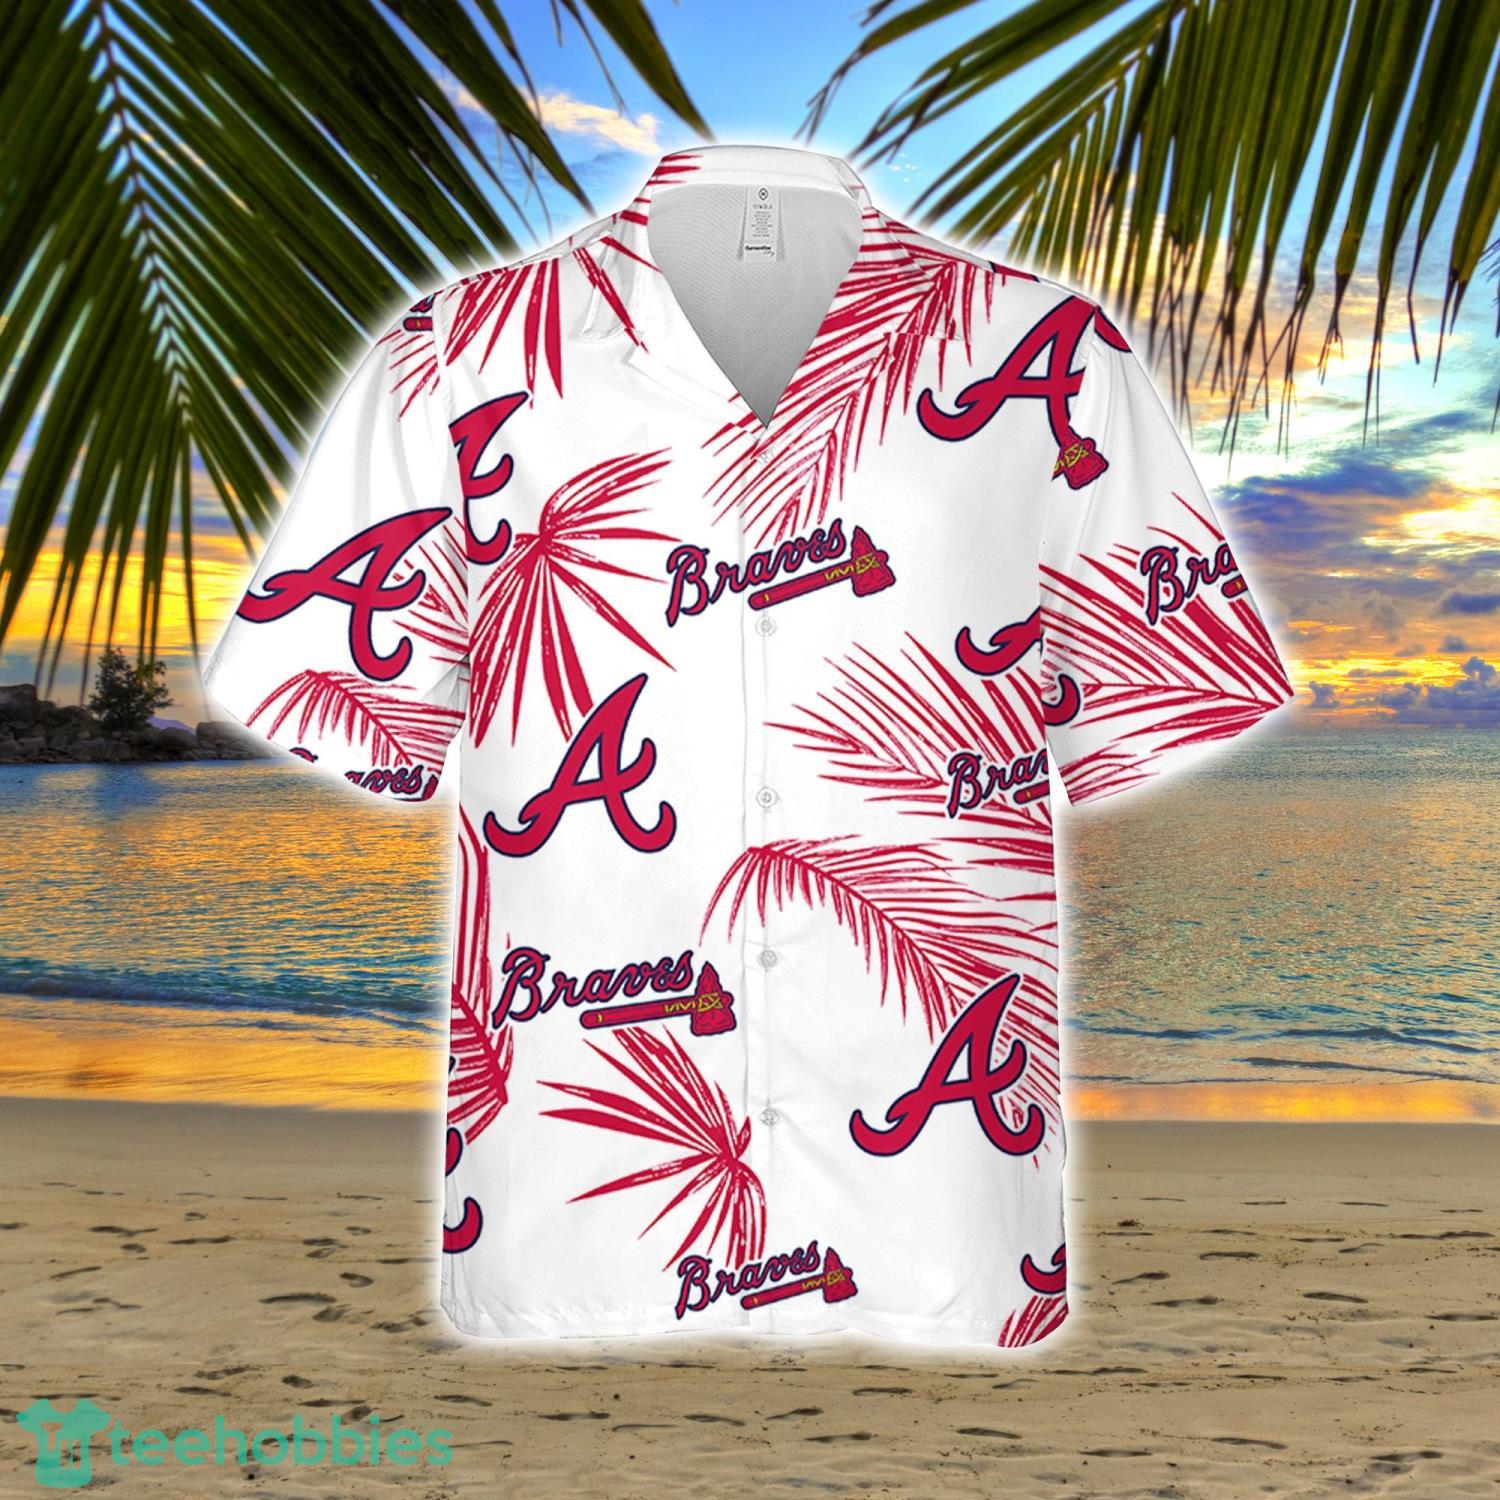 Atlanta Braves Logo And Green Leaf Pattern All Over Print Hawaiian Shirt  For Fans - Freedomdesign